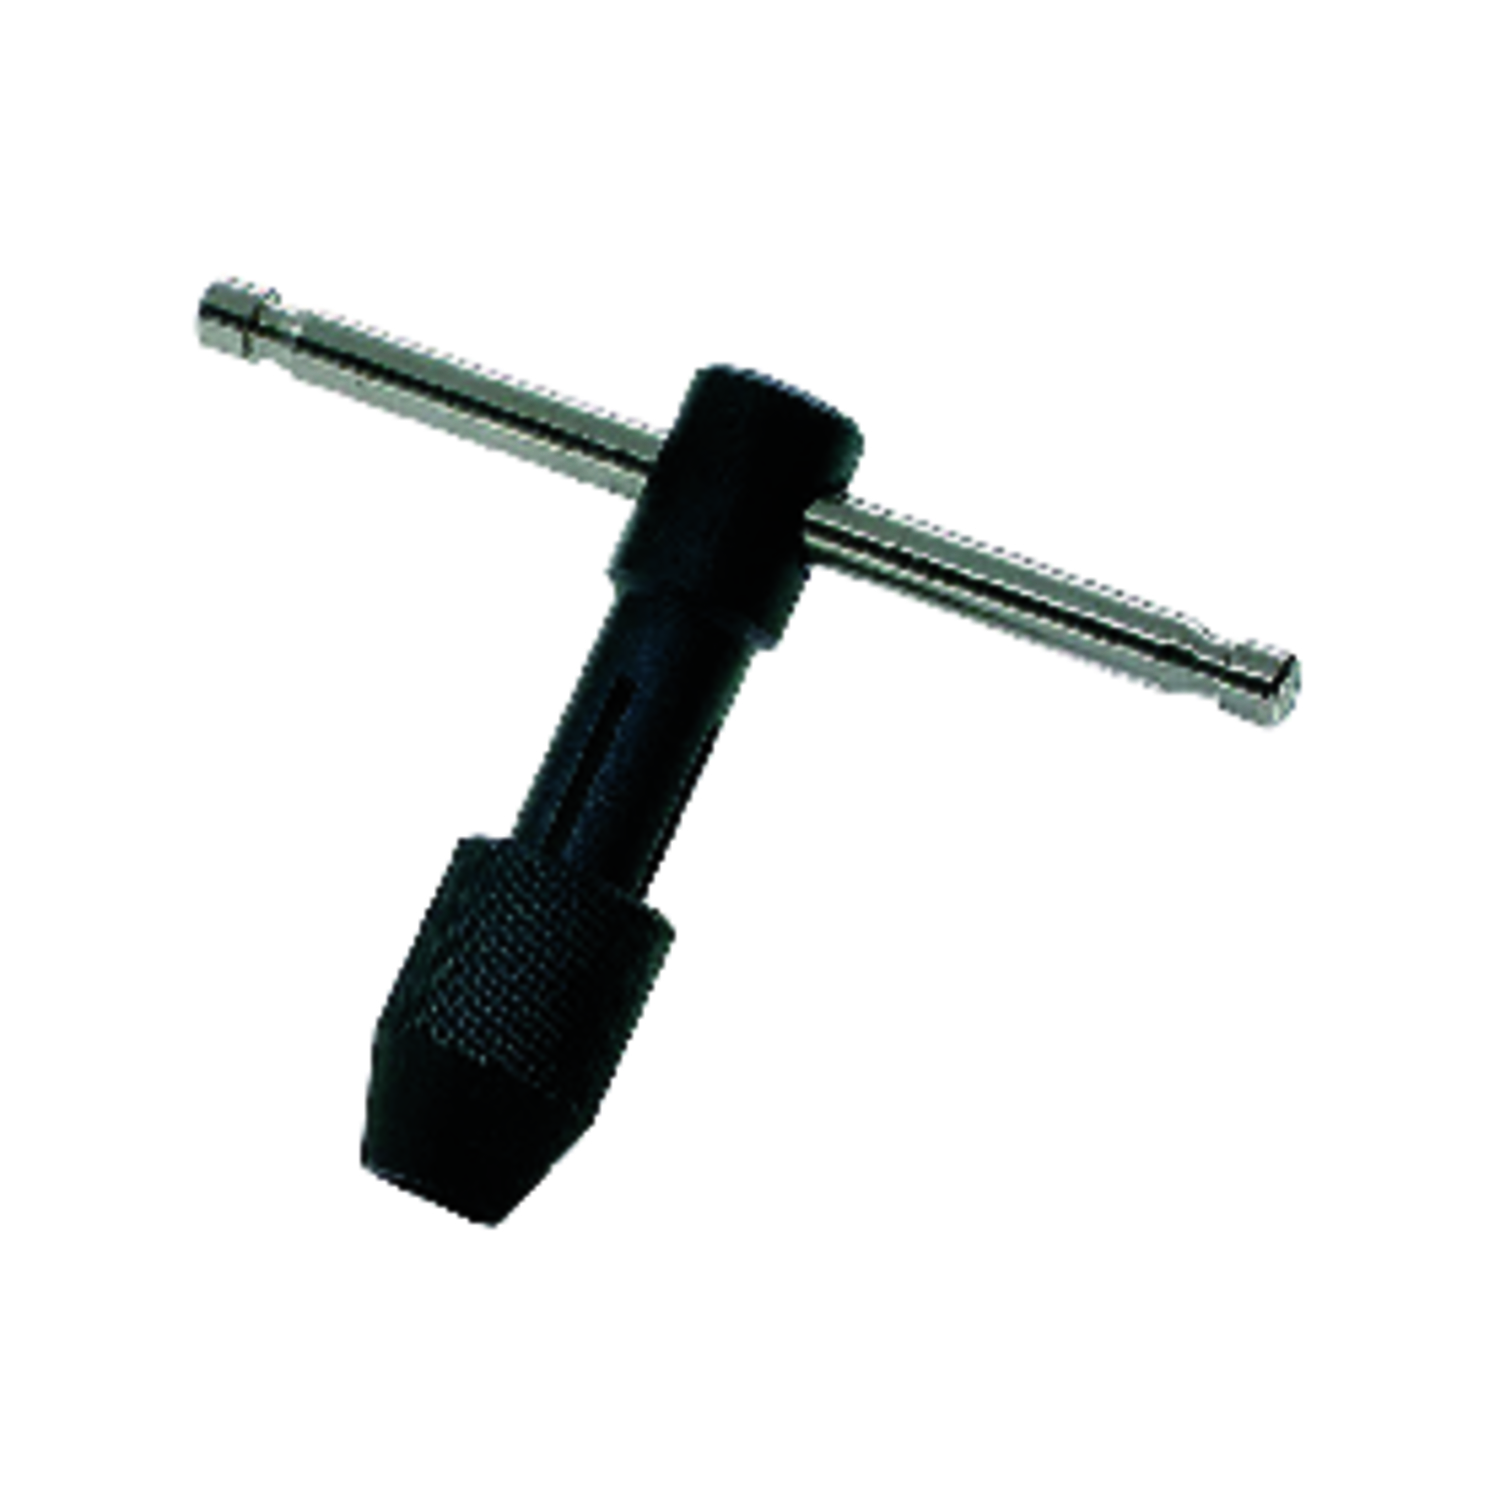 Irwin Hanson High Carbon Steel T-Handle Tap Wrench 1/4 to 1/2 in. 1 pc